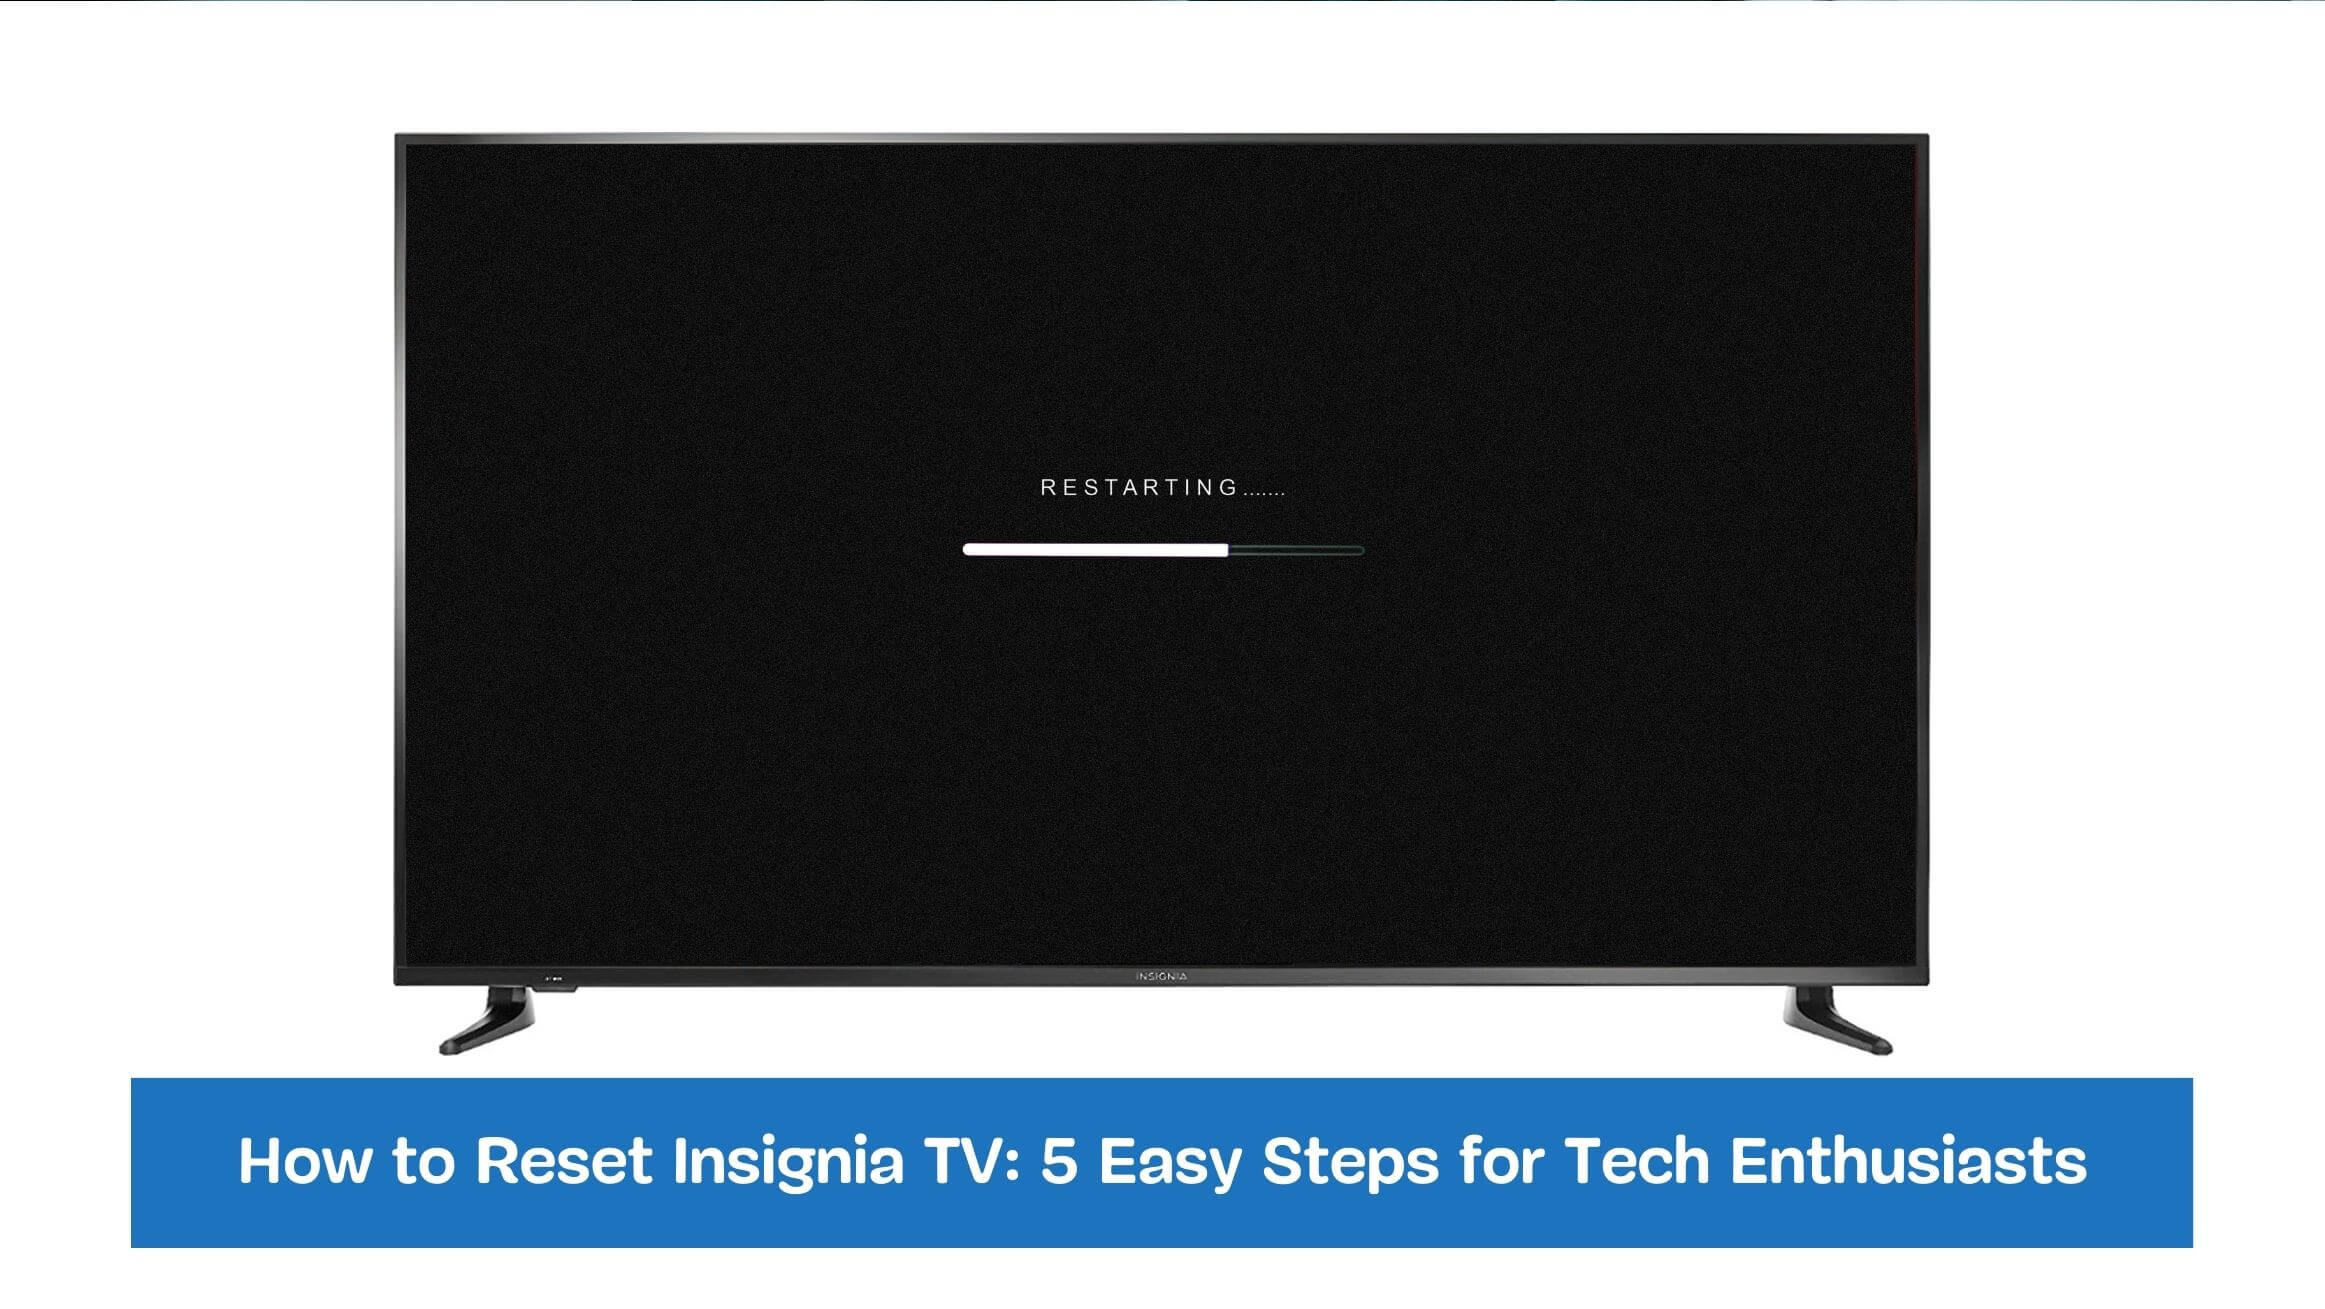 How to Reset Insignia TV: 5 Easy Steps for Tech Enthusiasts